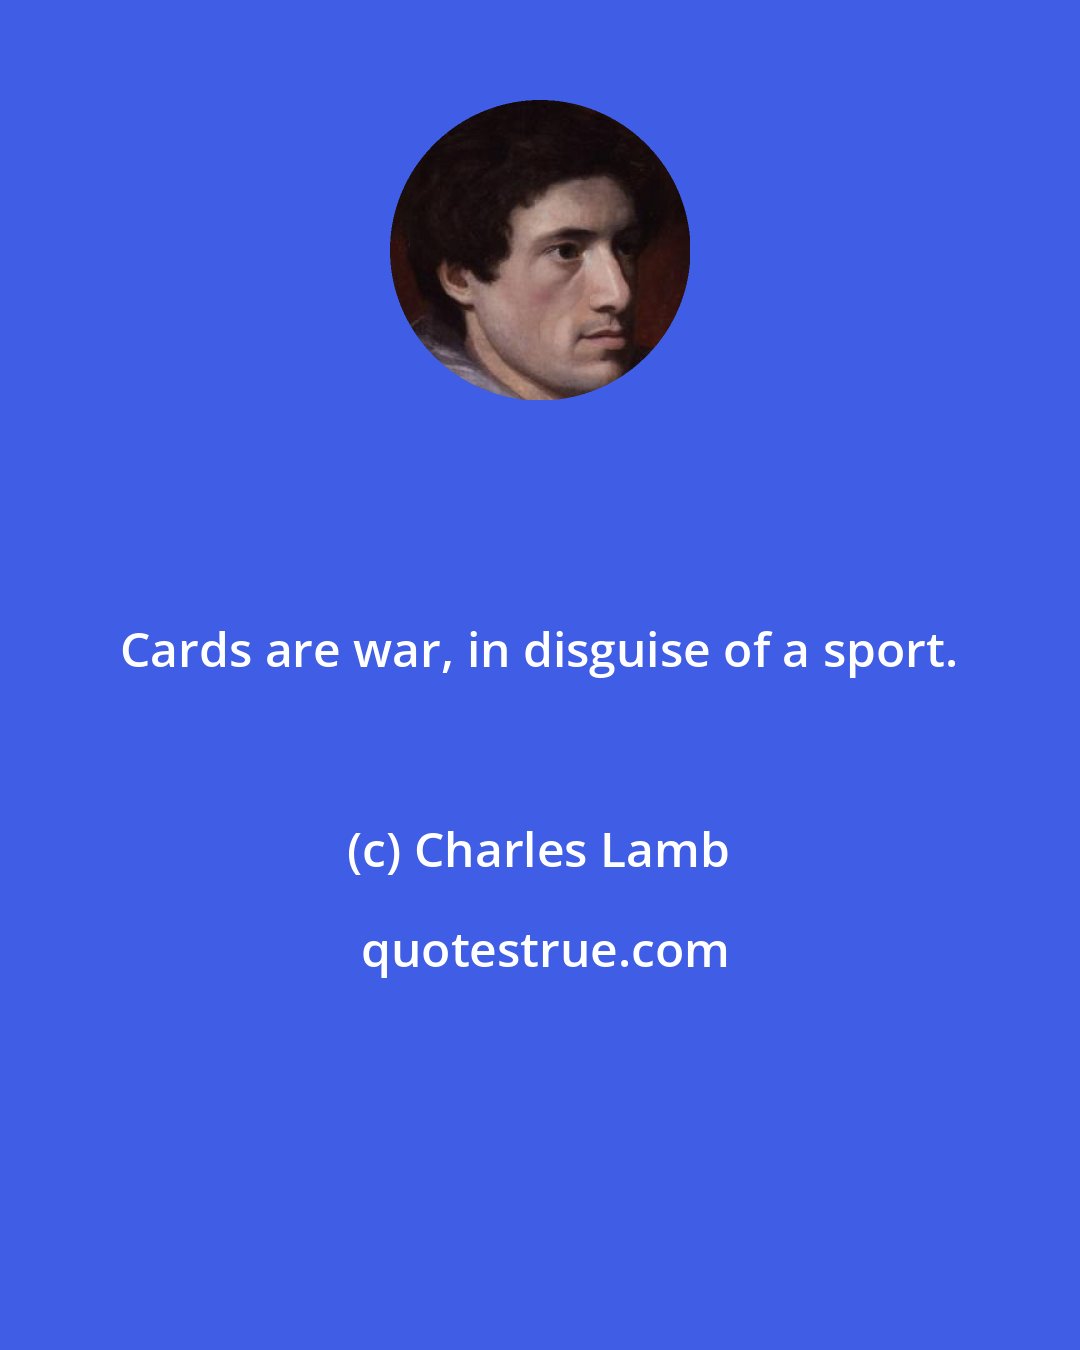 Charles Lamb: Cards are war, in disguise of a sport.